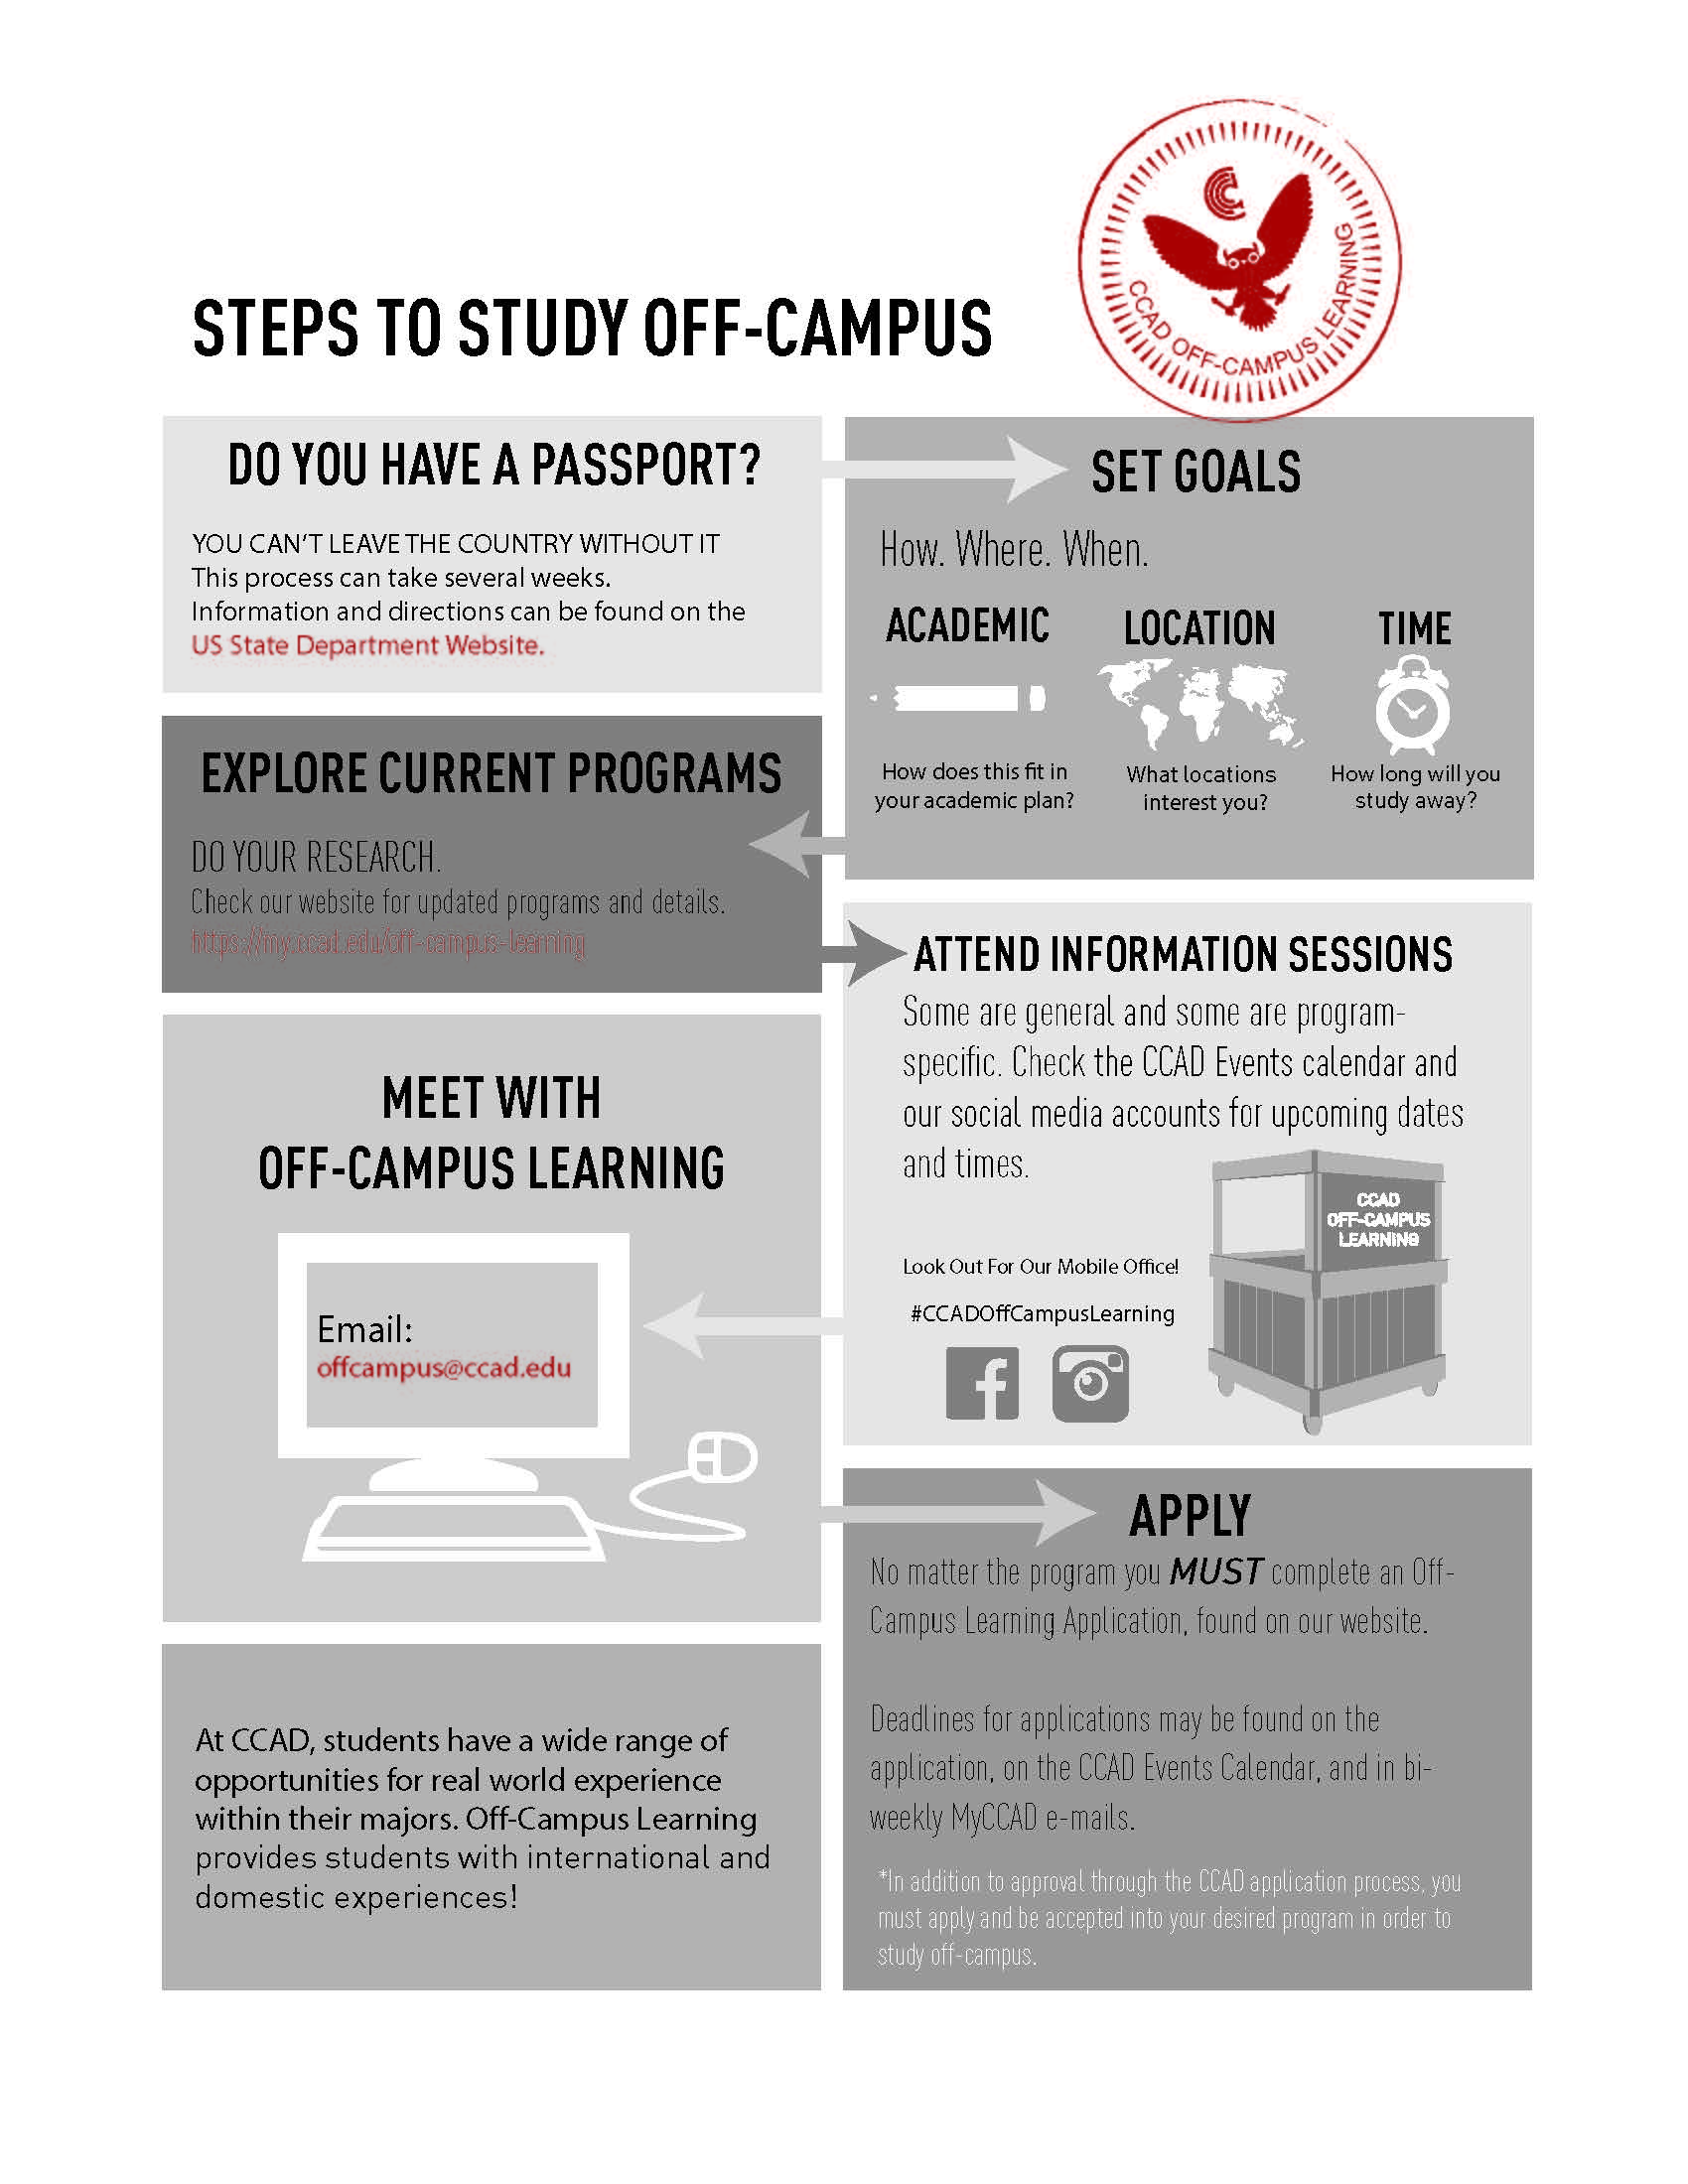 Getting started in the off-campus study program